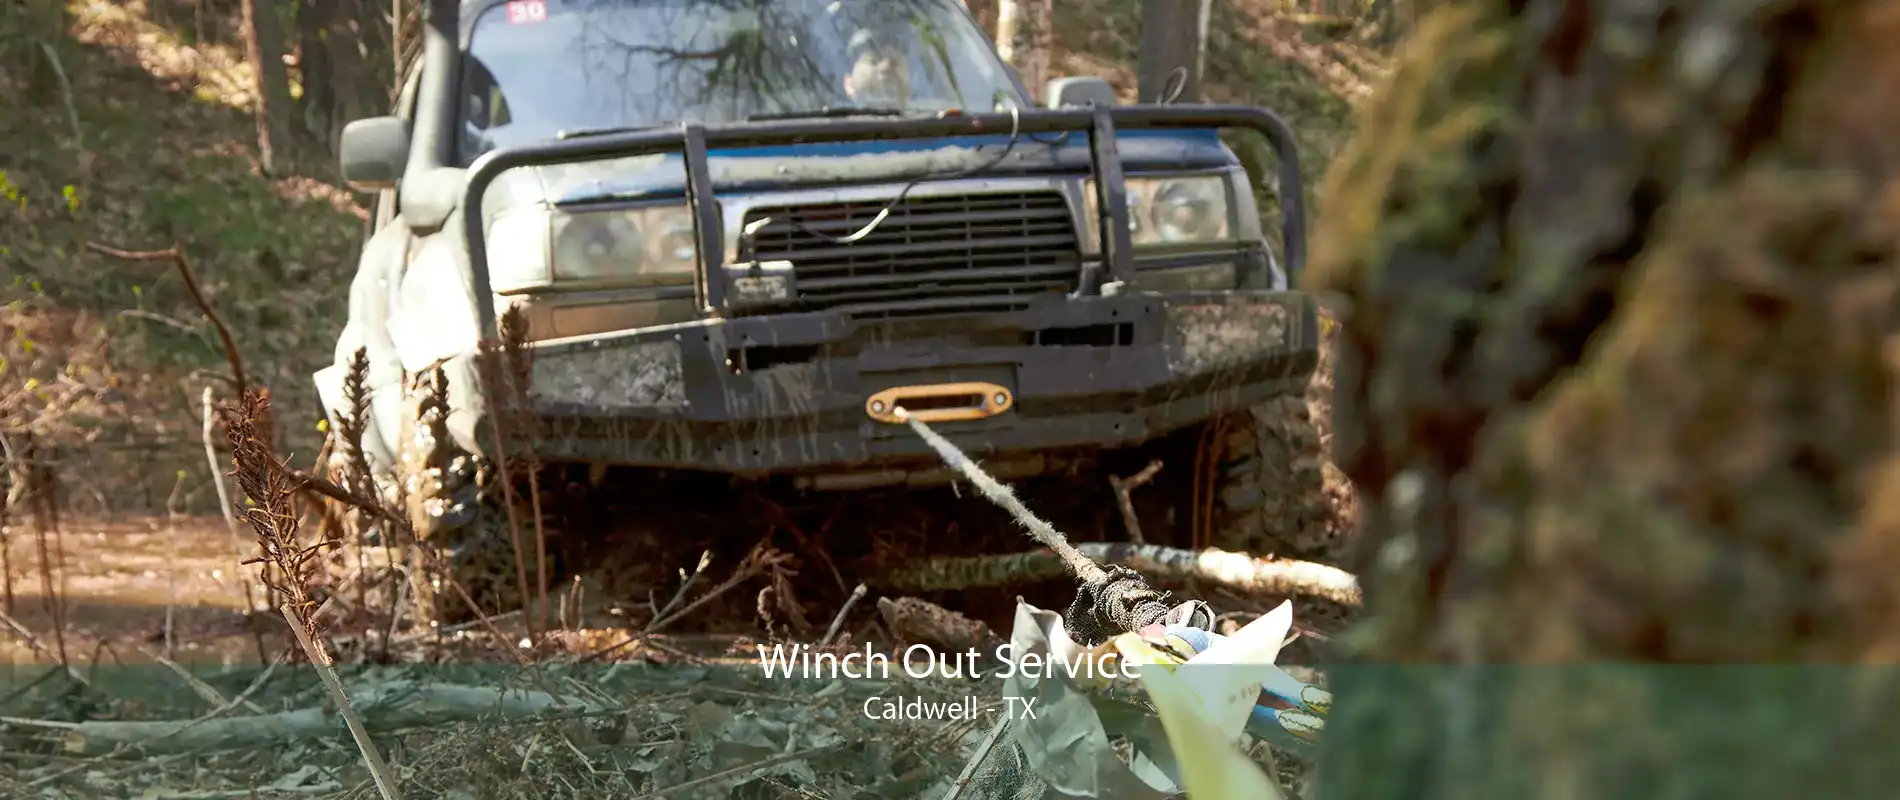 Winch Out Service Caldwell - TX